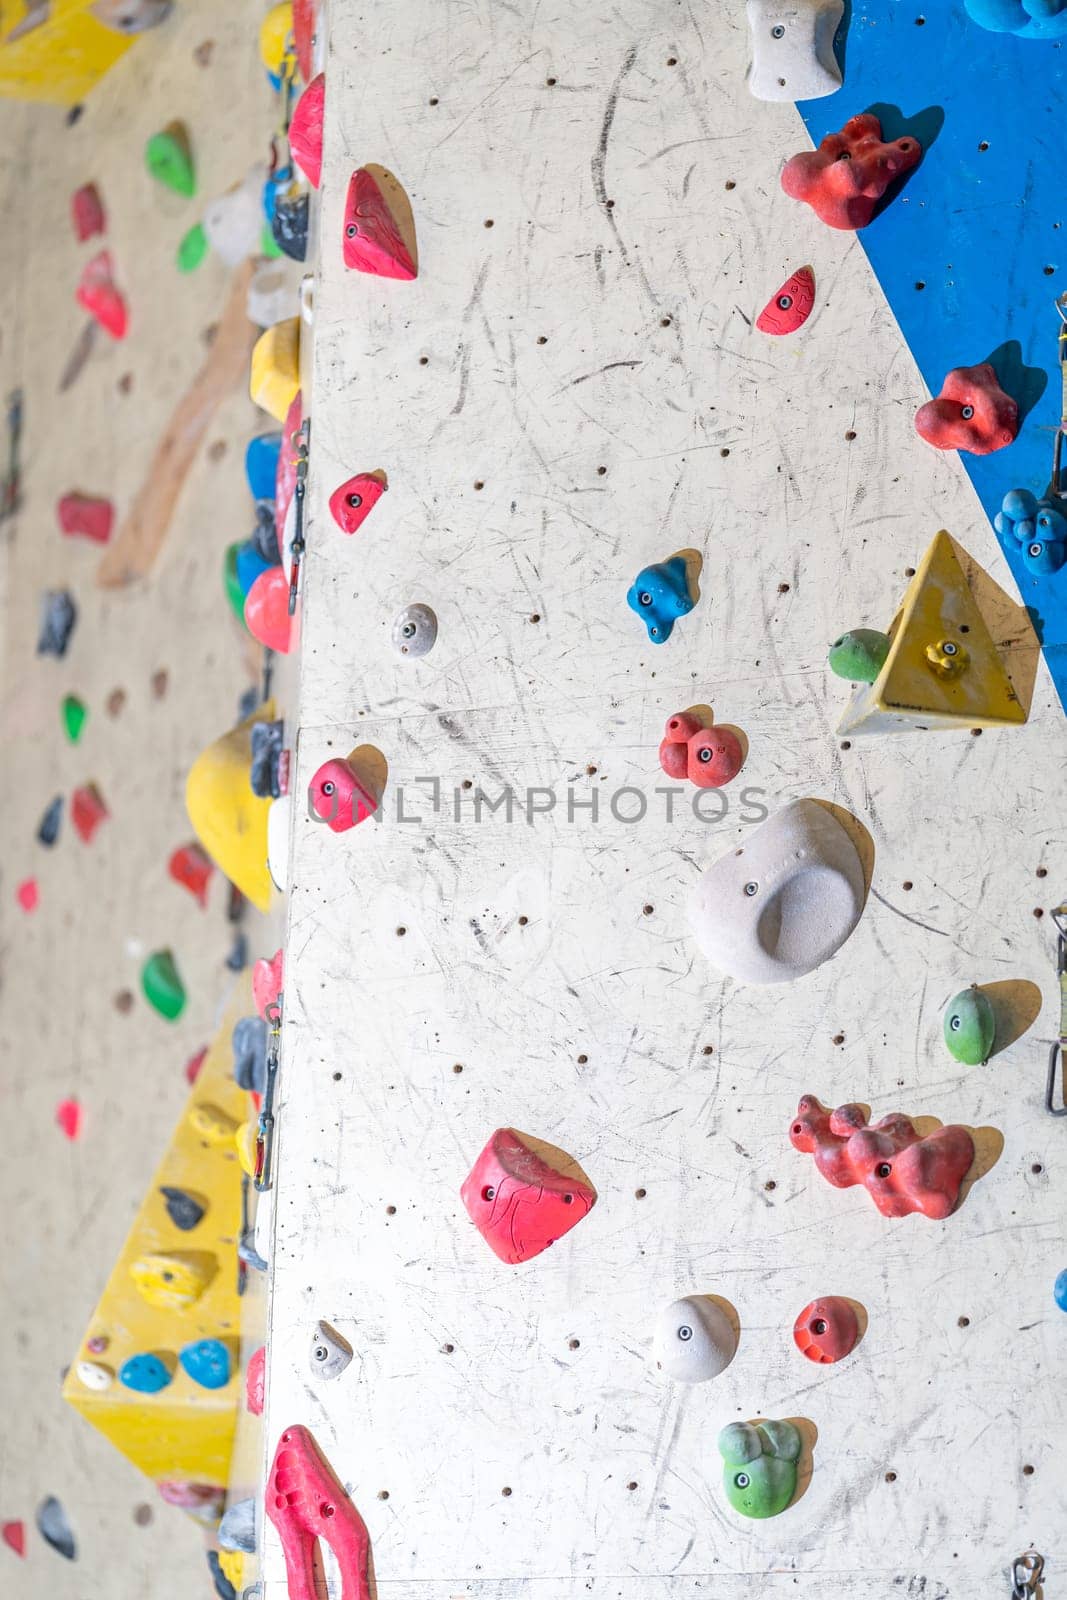 artificial climbing wall with grips and carabiners in the interior by Edophoto